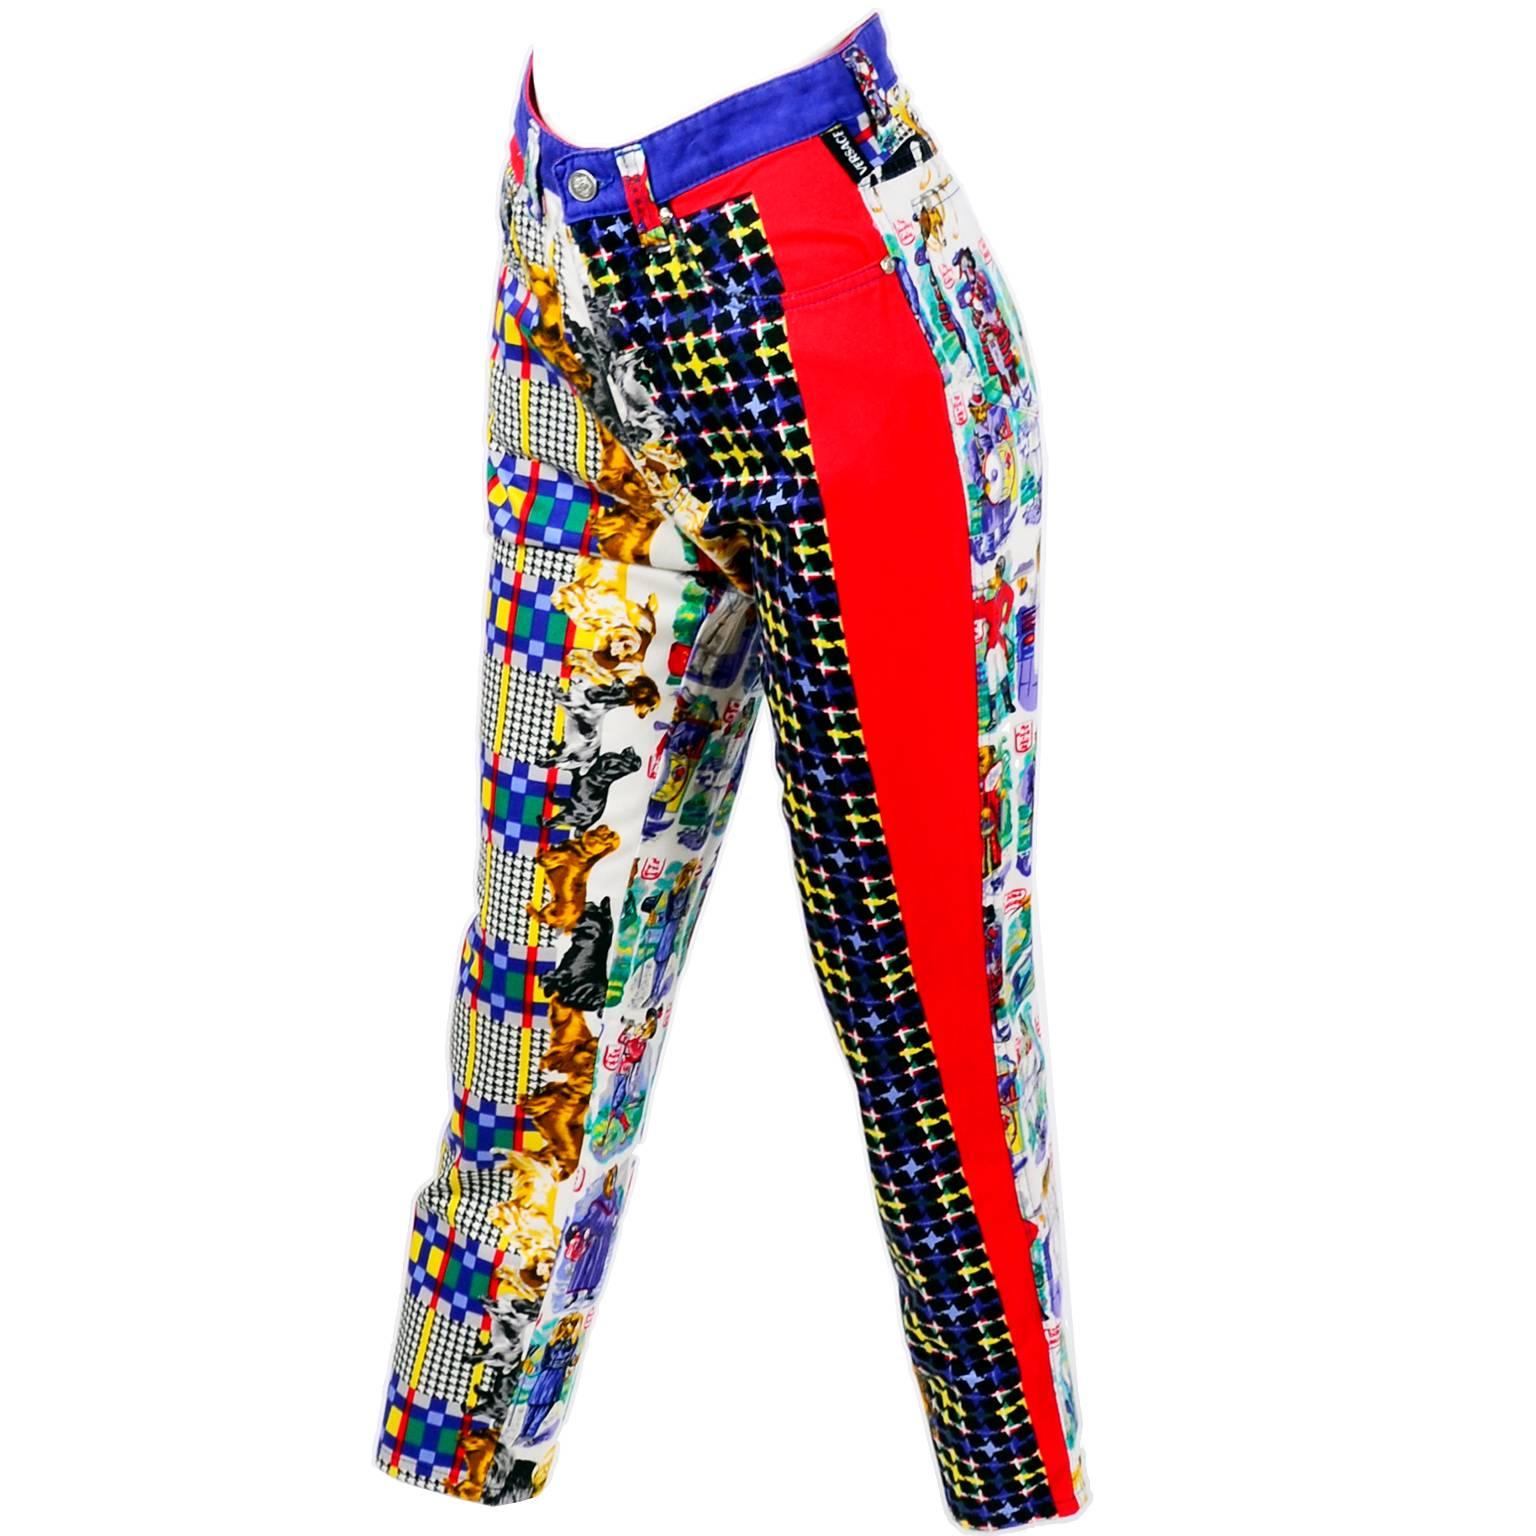 These are rare Gianni Versace Couture jeans in a novelty dog print with black and white houndstooth, bright plaids, and a red strip up the side of the left leg and a blue strip up the length of the right side.  The print includes names for dogs that